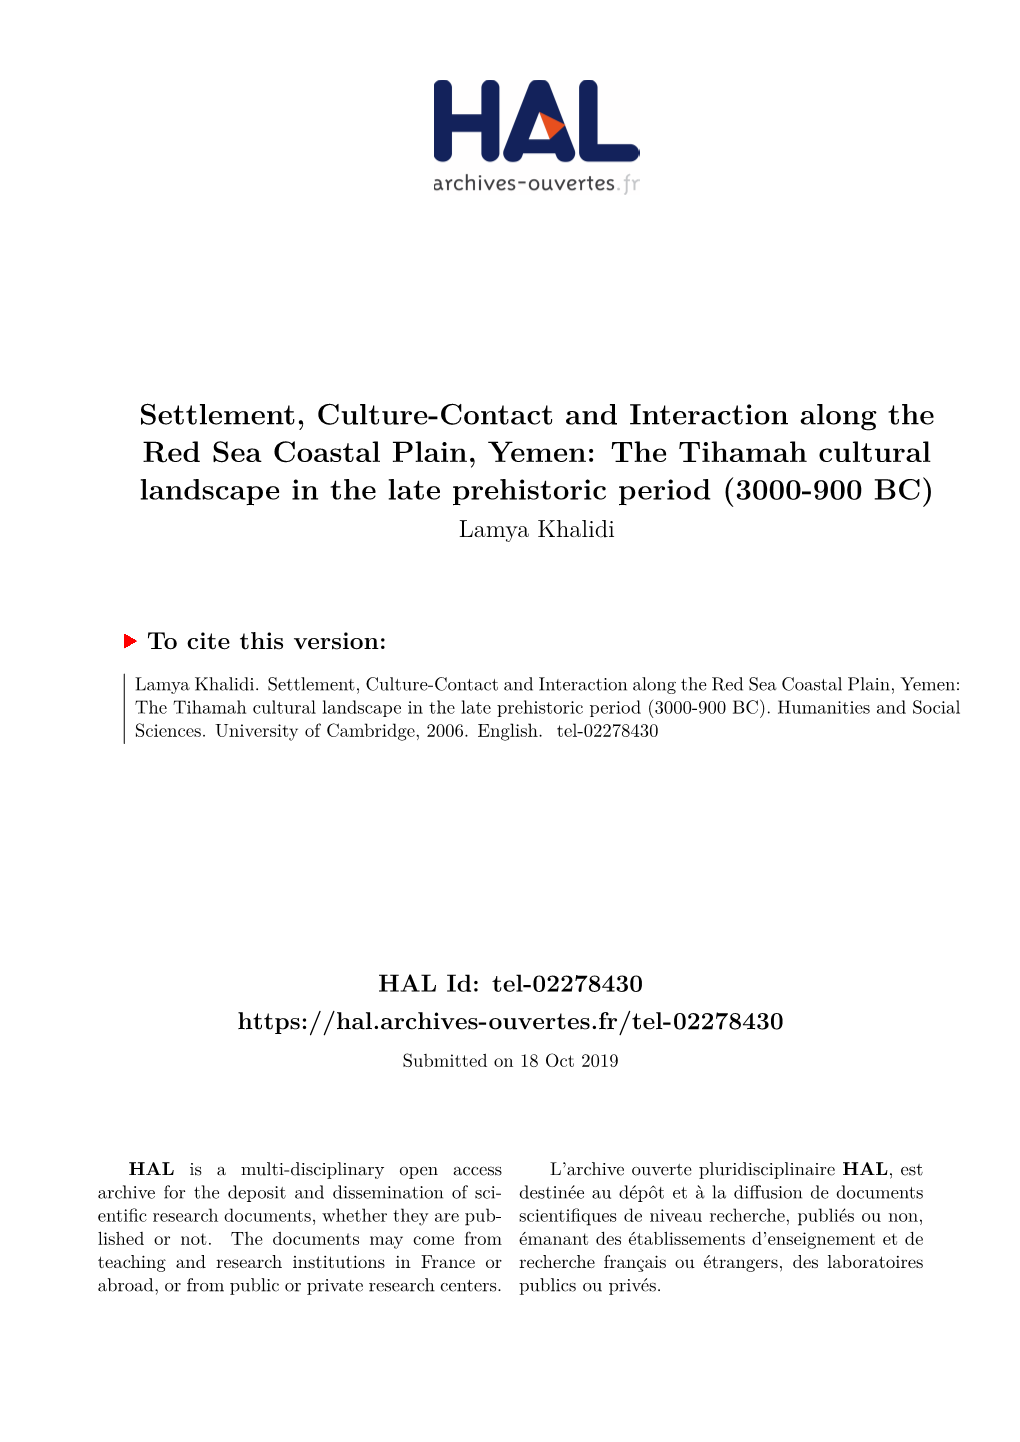 Settlement, Culture-Contact and Interaction Along the Red